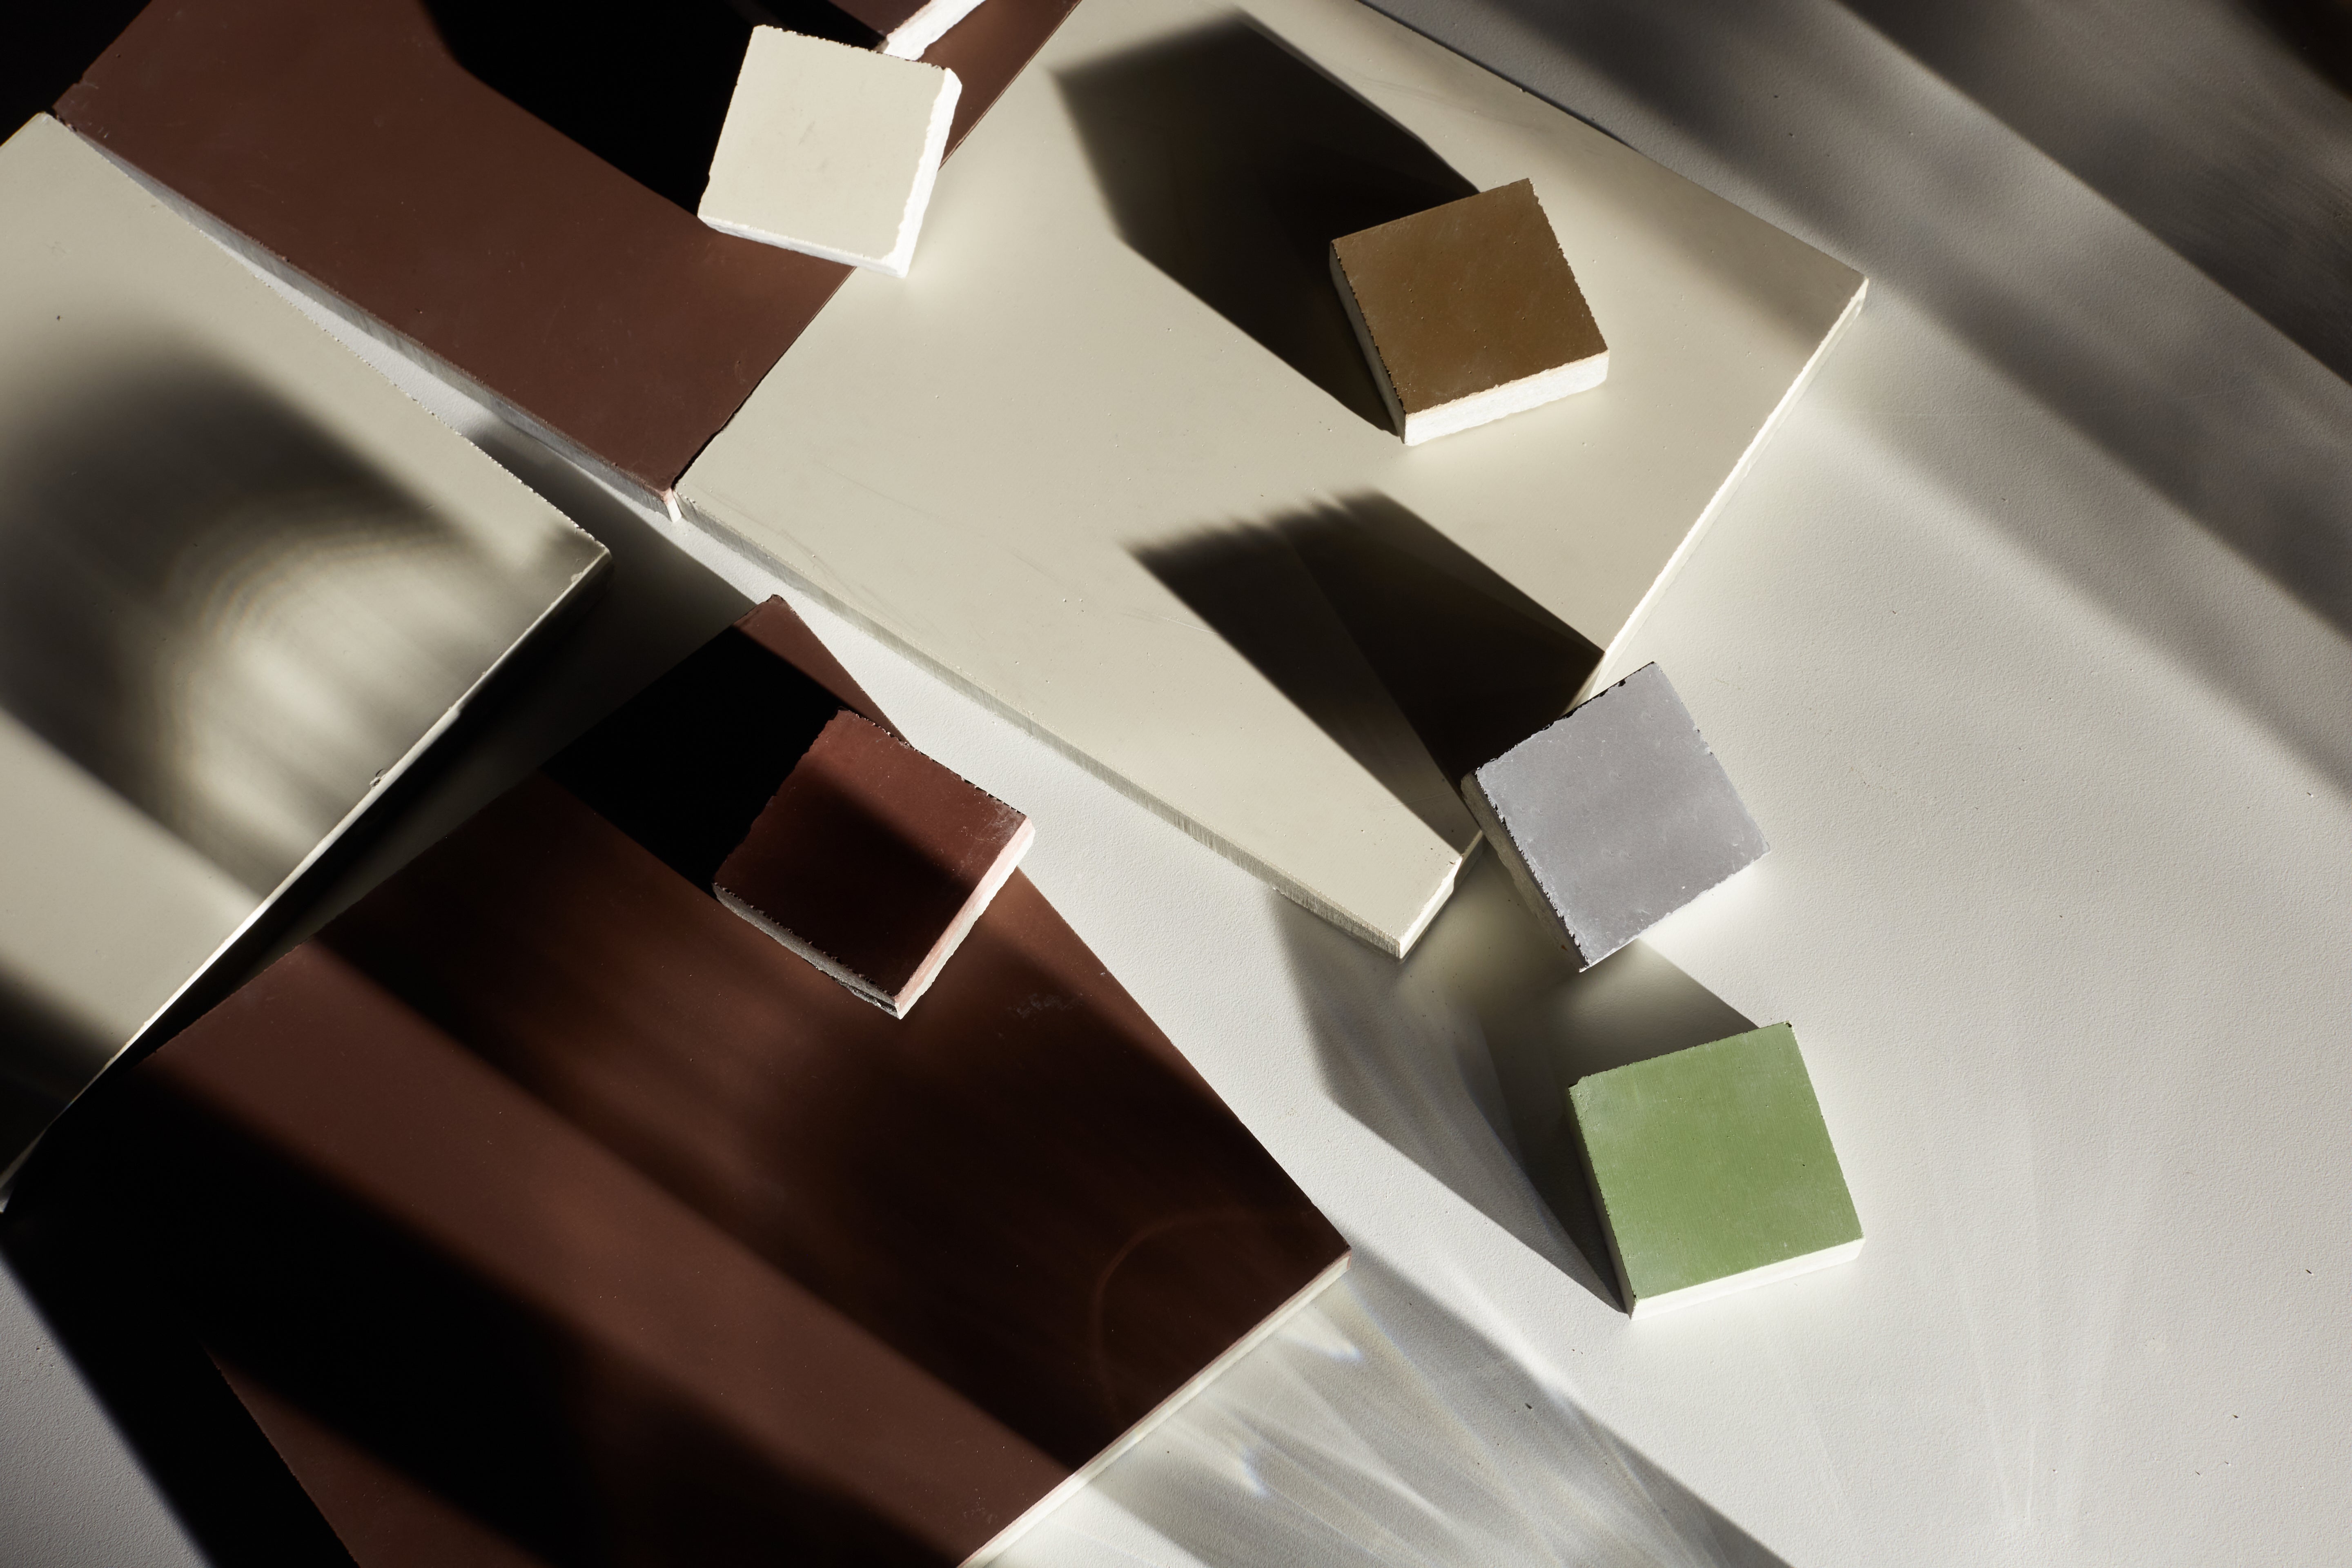 Shadowy, stylized shot of various square cement tiles in brown, cream, and light green against a white background.